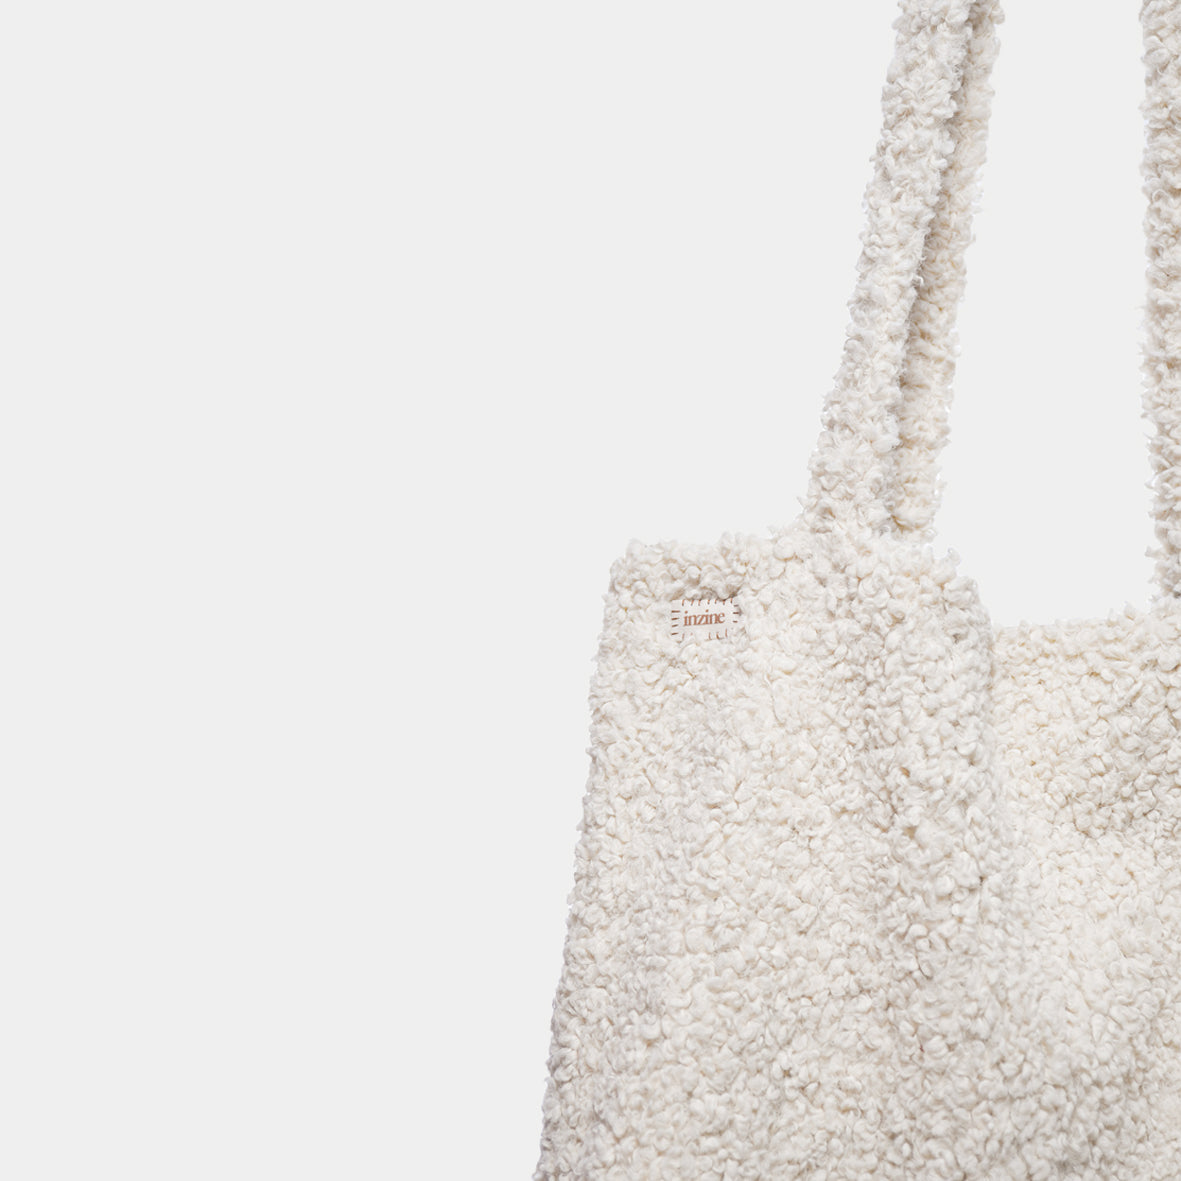 Teddy tote bag, off white colour with brown inzine label. Hand made in New Zealand.